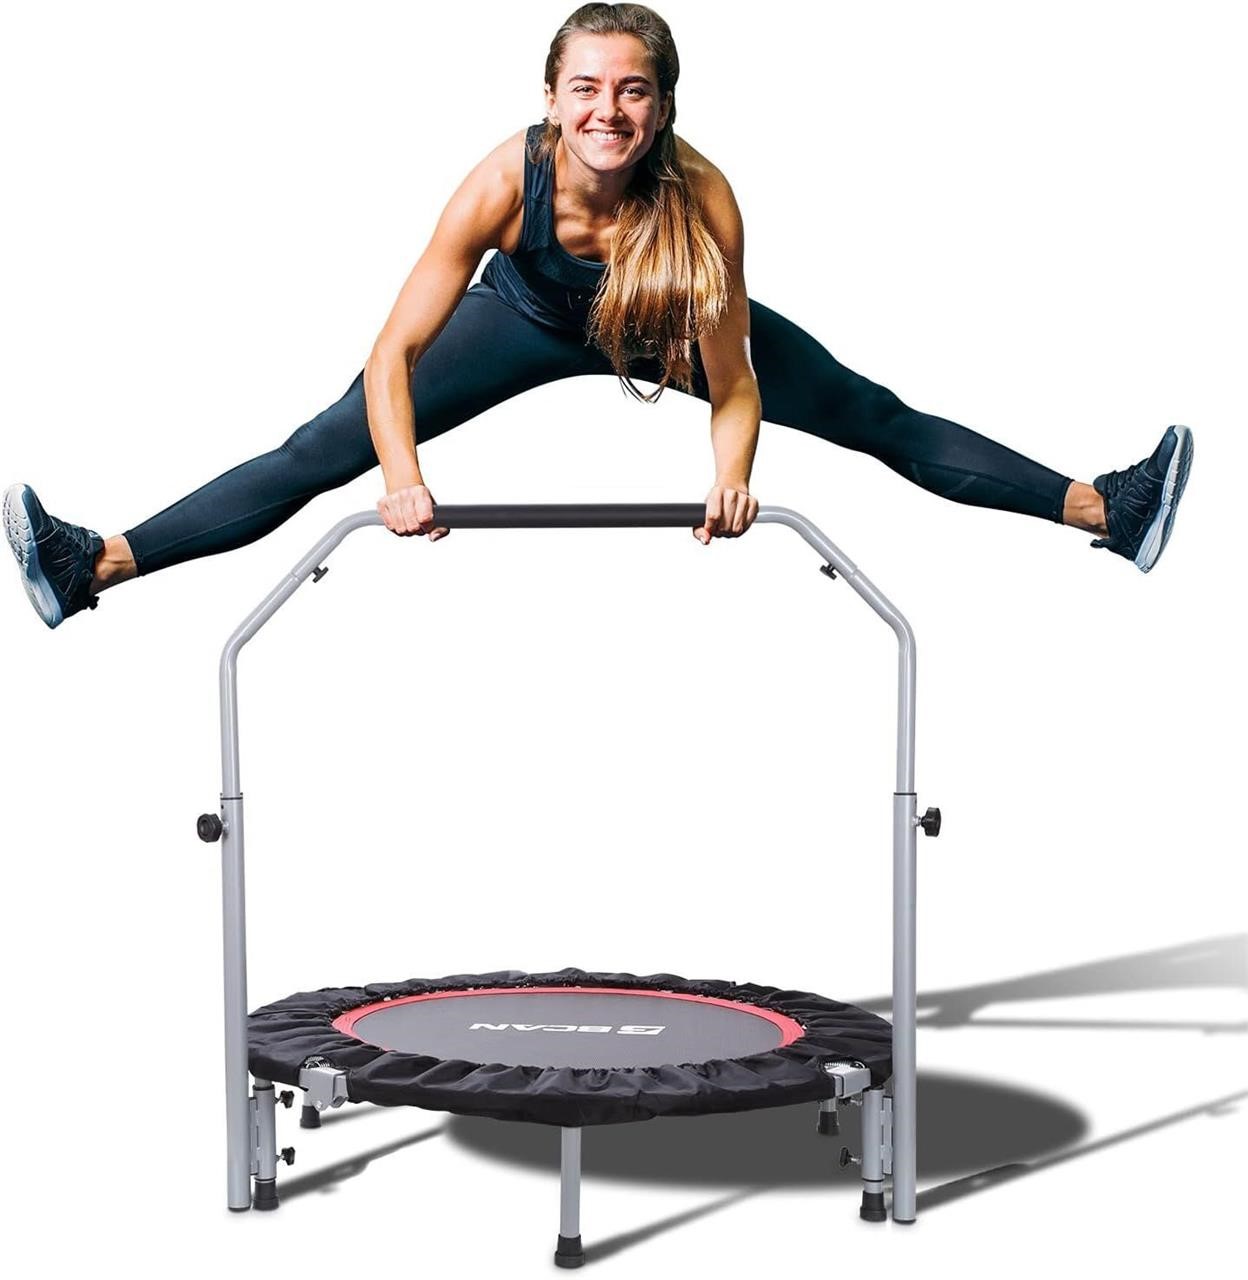 Exercise Trampoline forAdults MaxLoad 330lbs440lbs